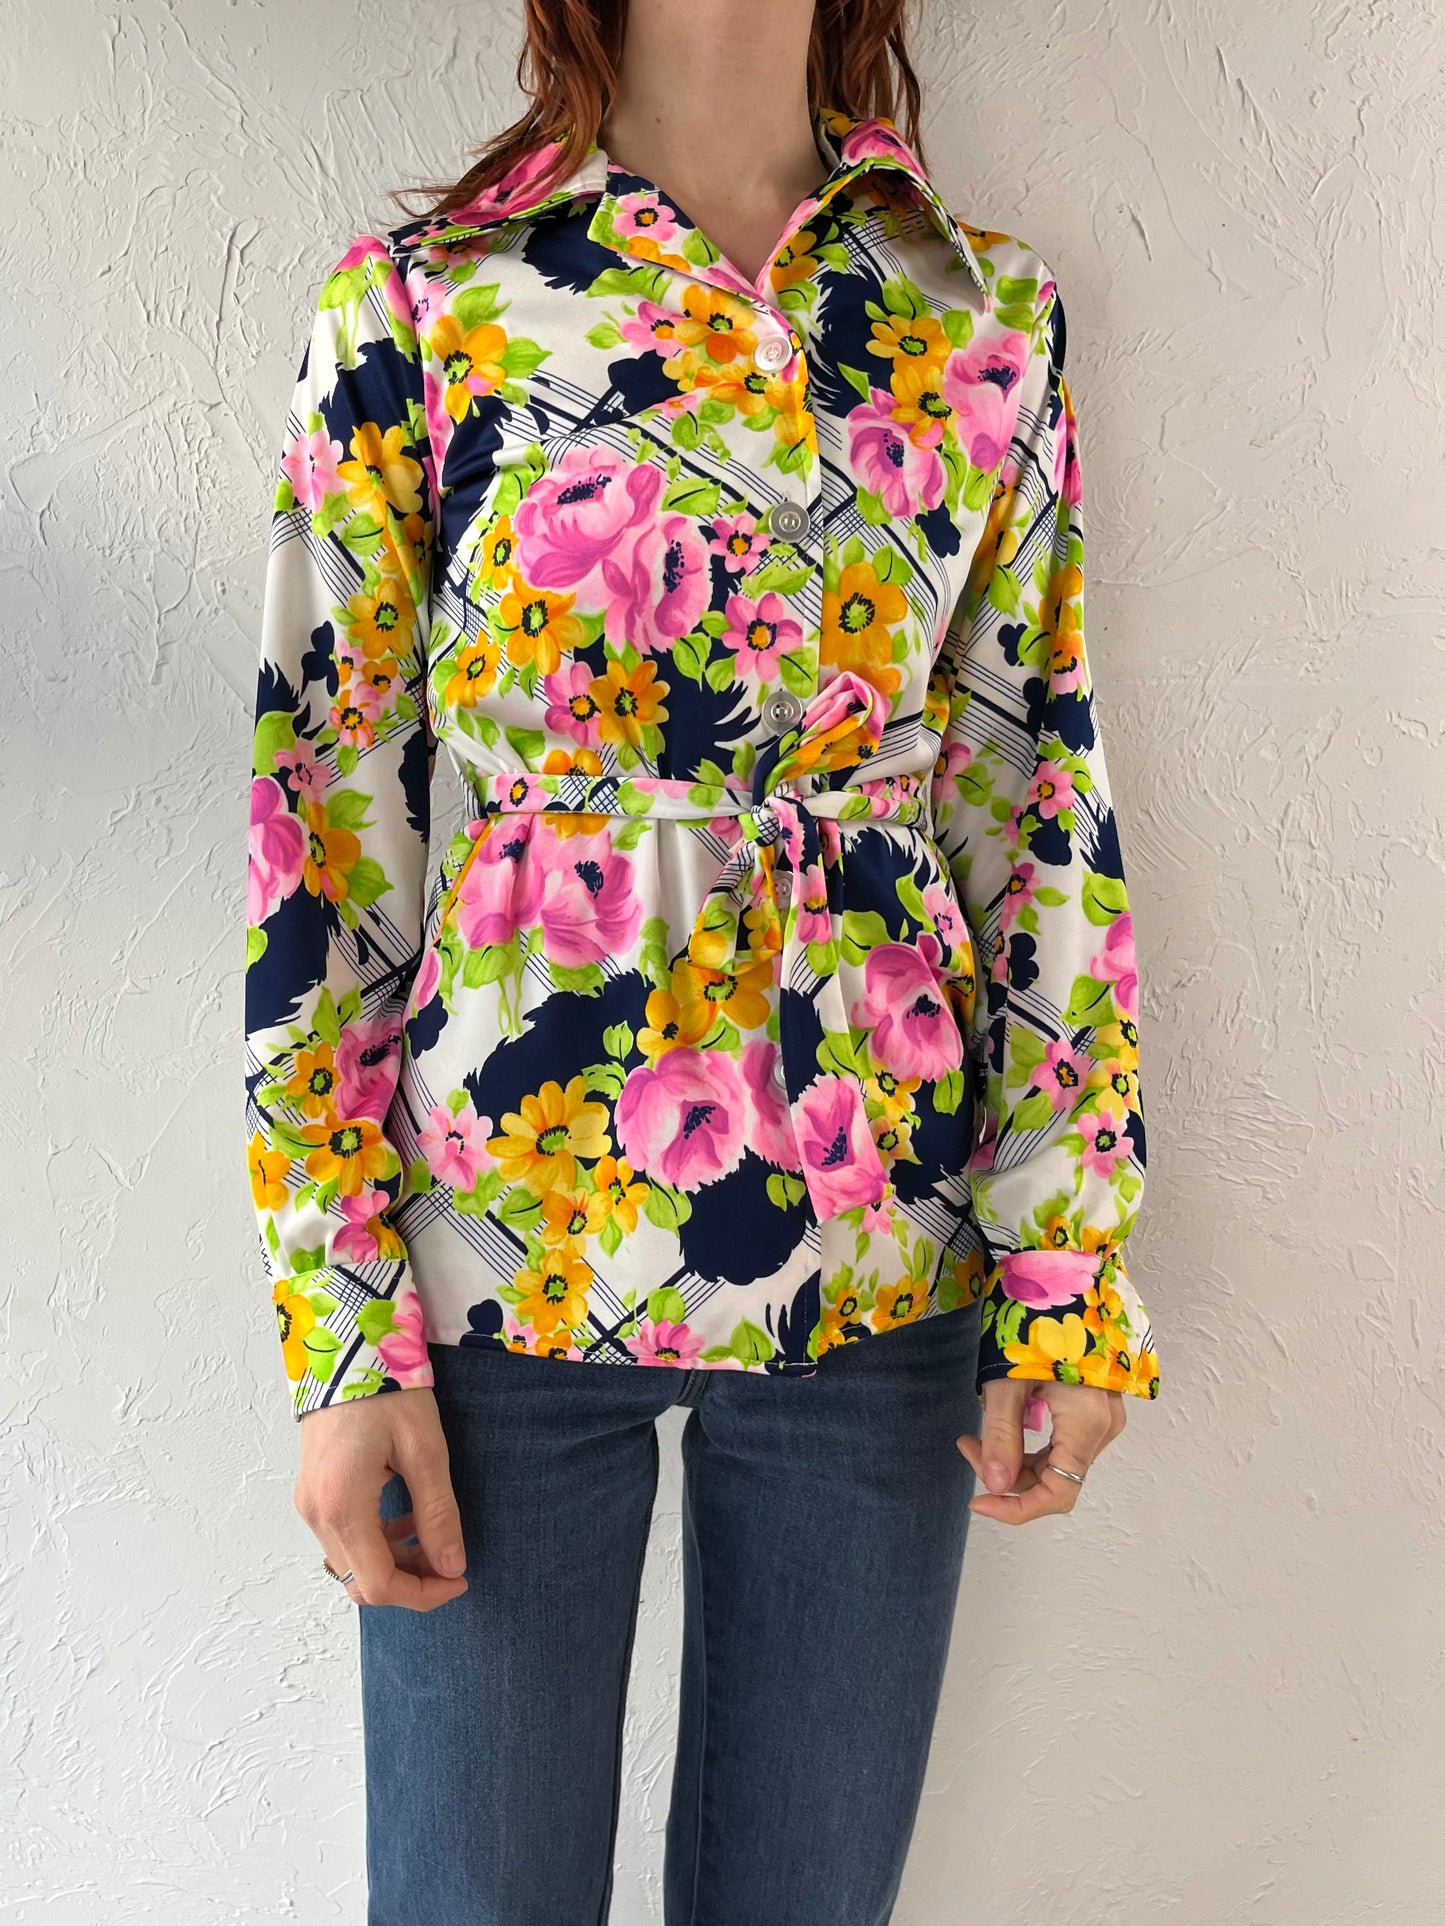 70s Retro Floral Print Blouse / Small